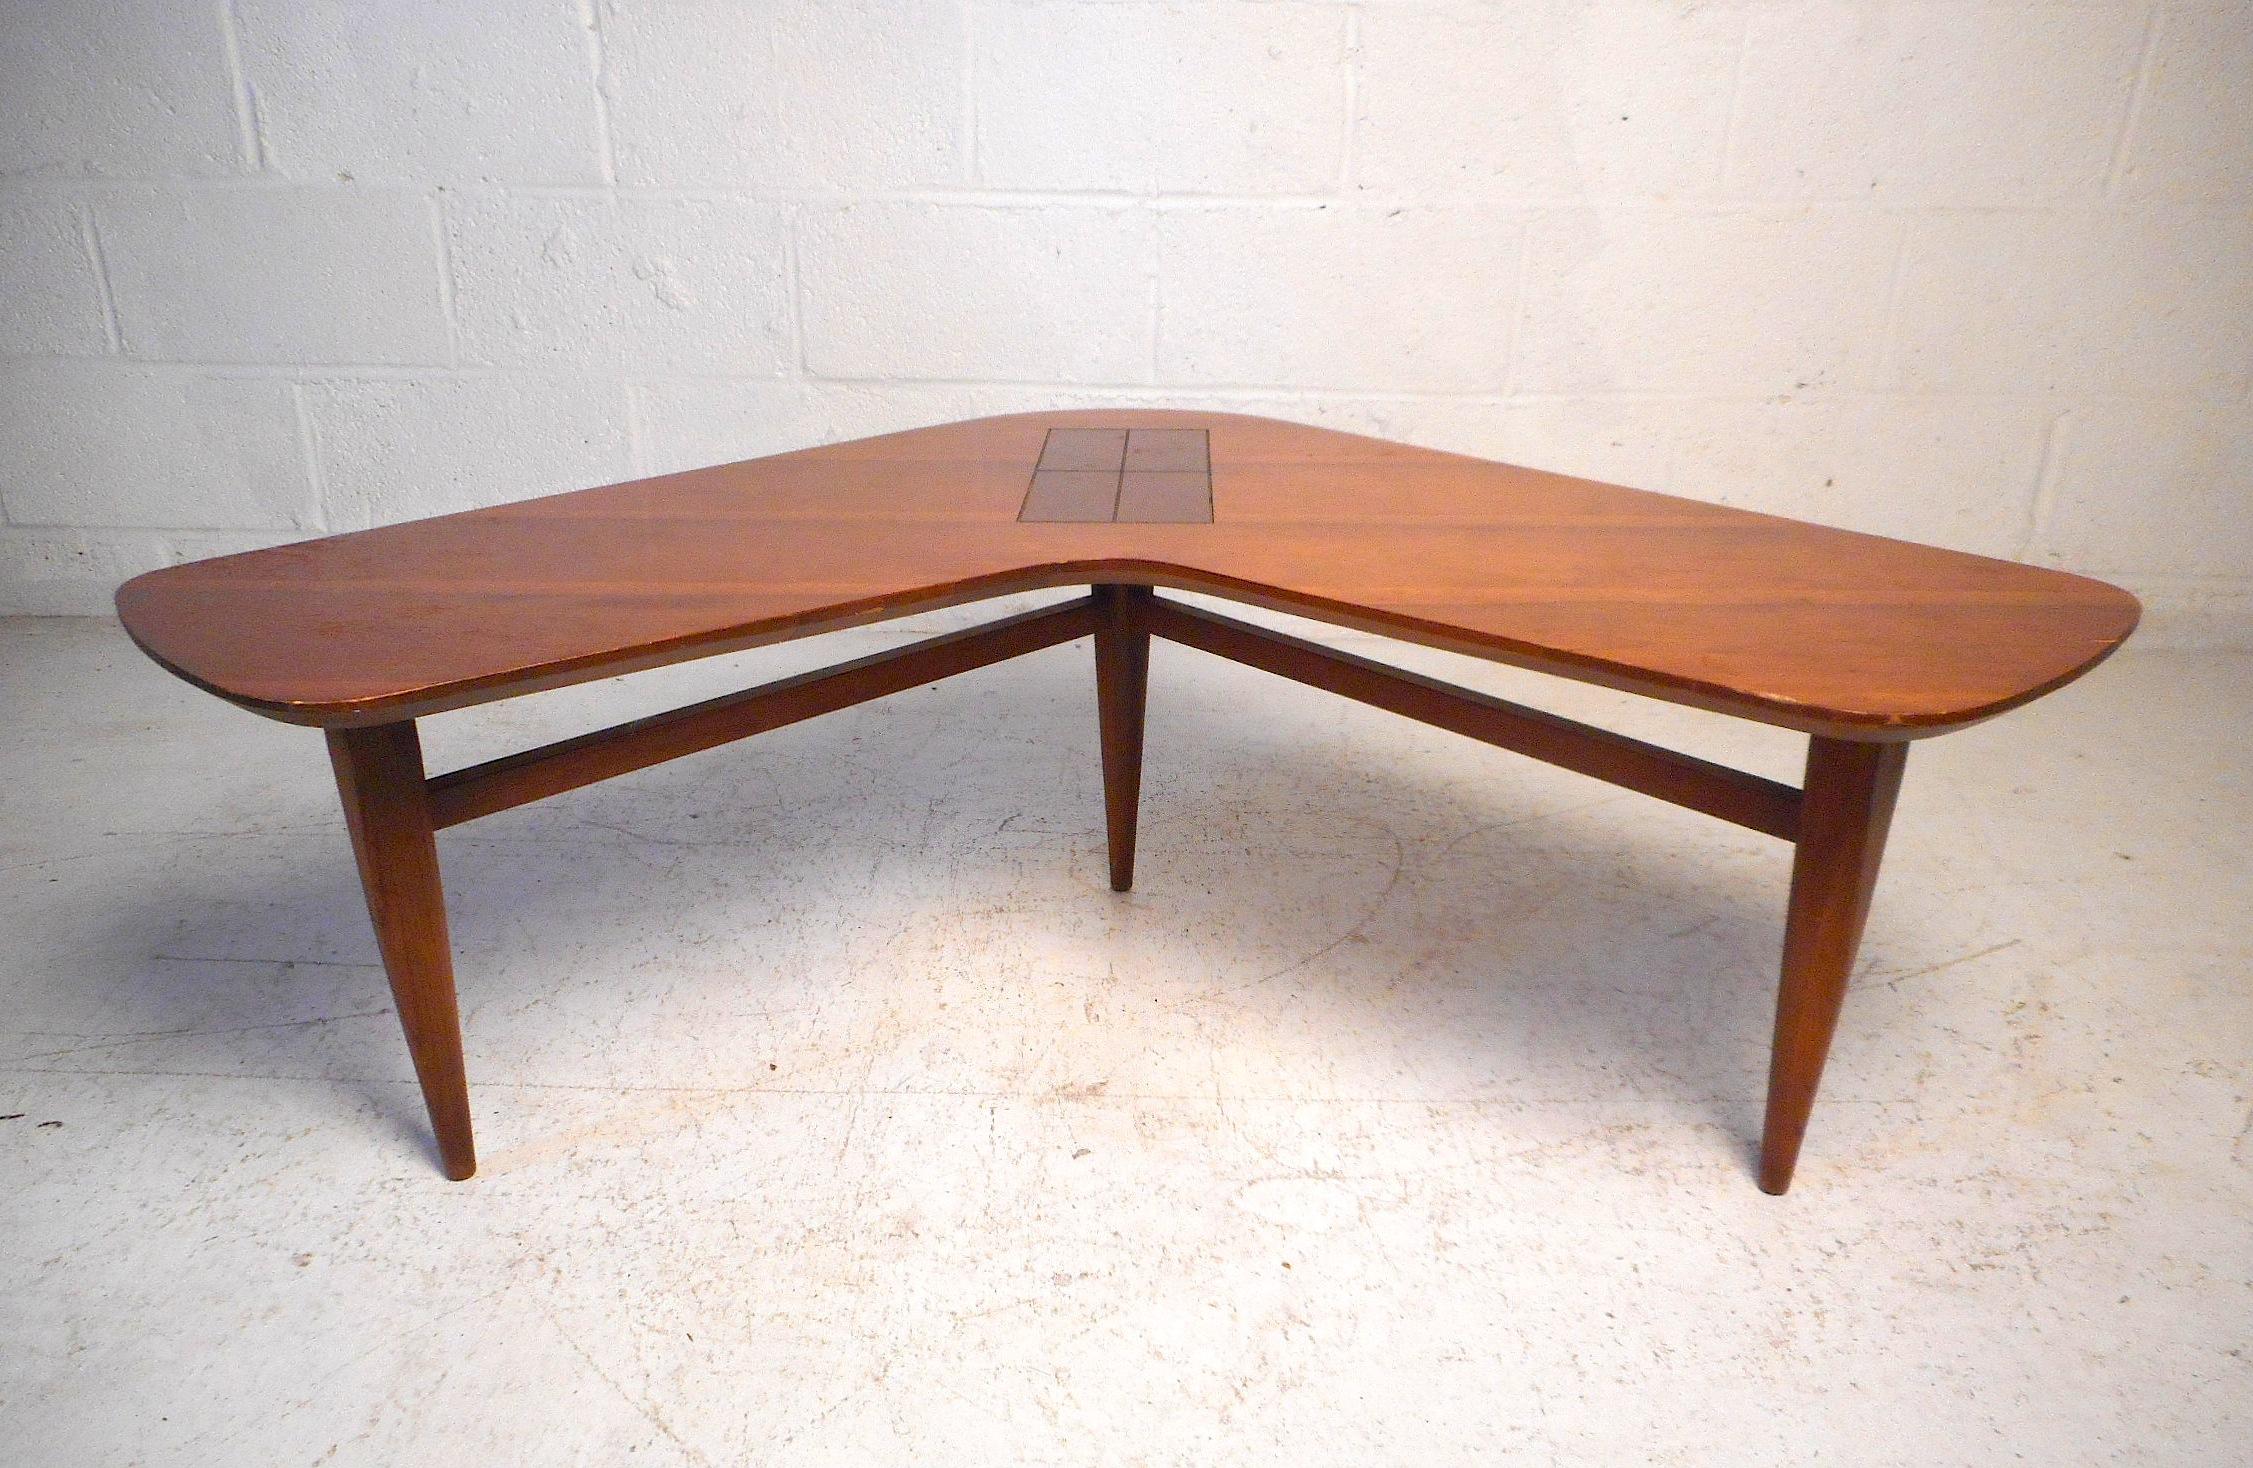 This unusual midcentury boomerang table features a sturdy finished walnut construction, sleek tapered legs connected by stretchers, and a beautiful cross-sectioned burl inlay in the center of the tabletop. A rare midcentury design sure to make a